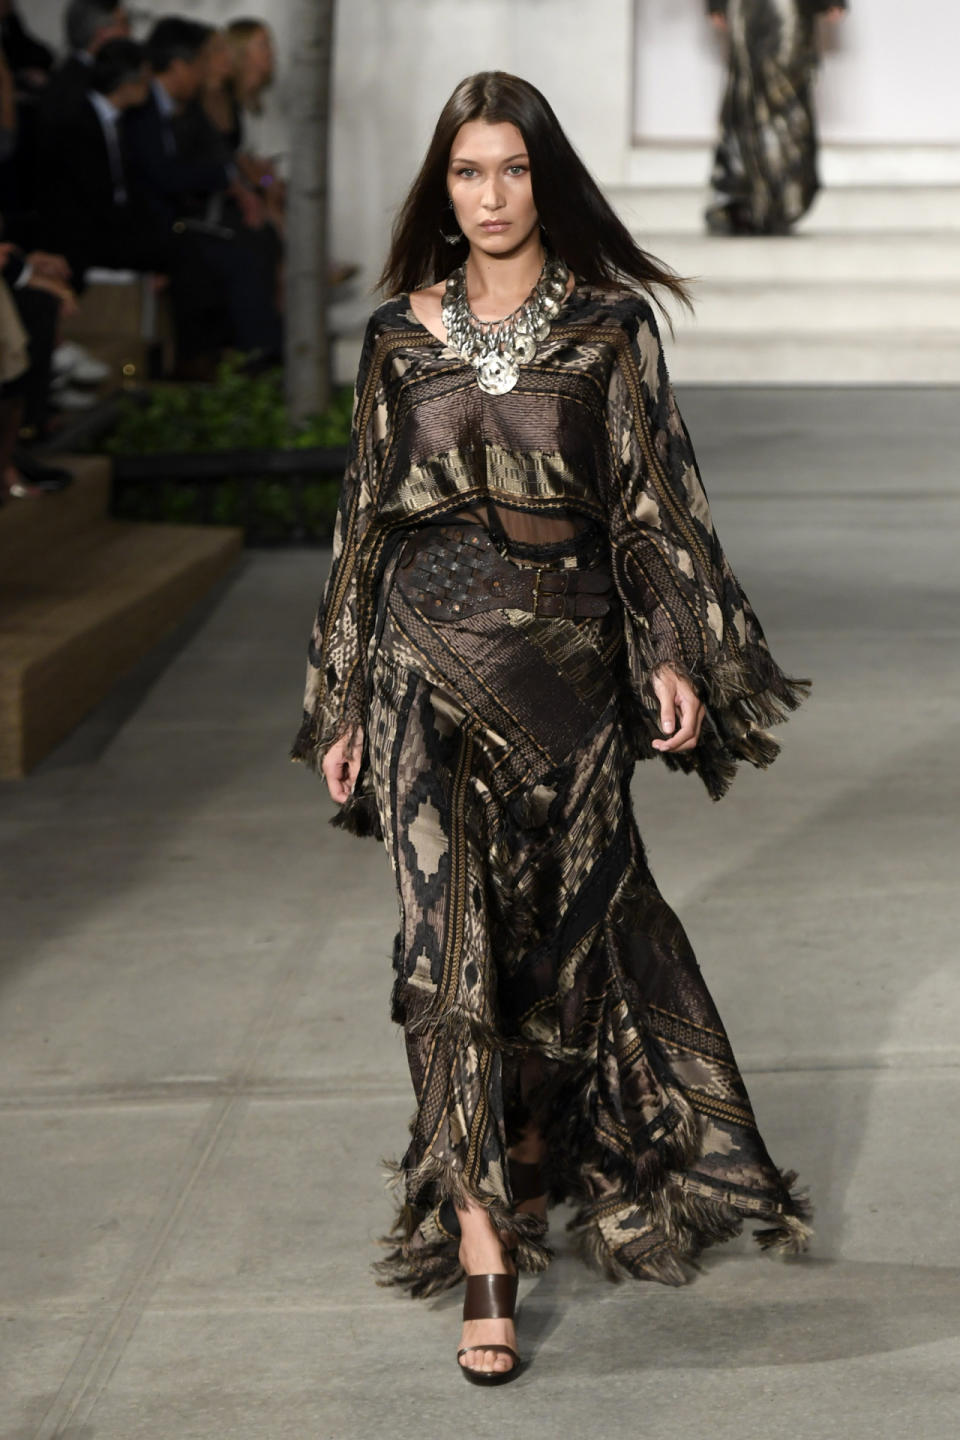 <p>Also at the Ralph Lauren Show, Bella Hadid sashayed down the catwalk in a fringed boho chic dress. <i> [Photo: Getty]</i></p>